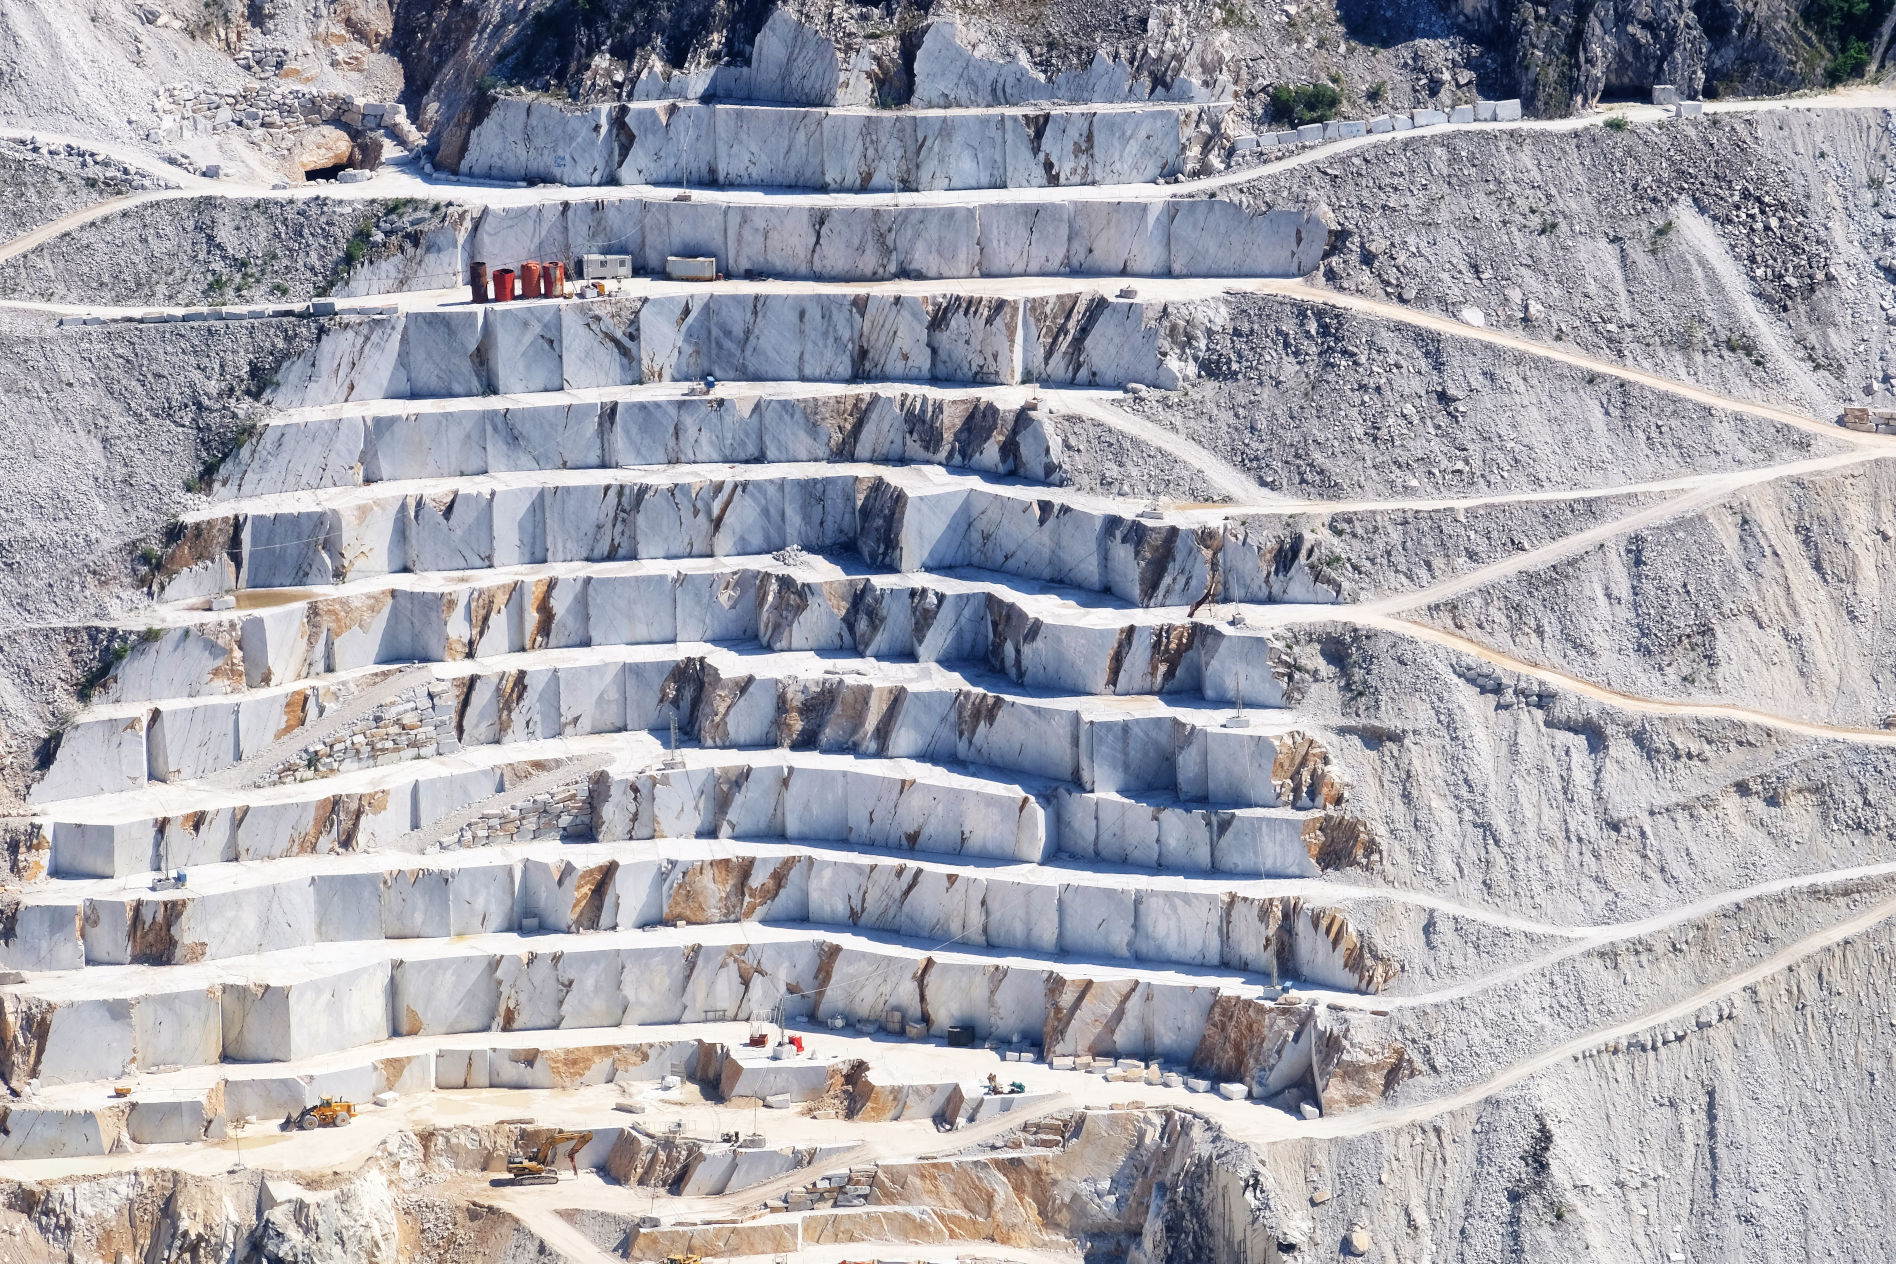 Marble Quarry in Tuscany